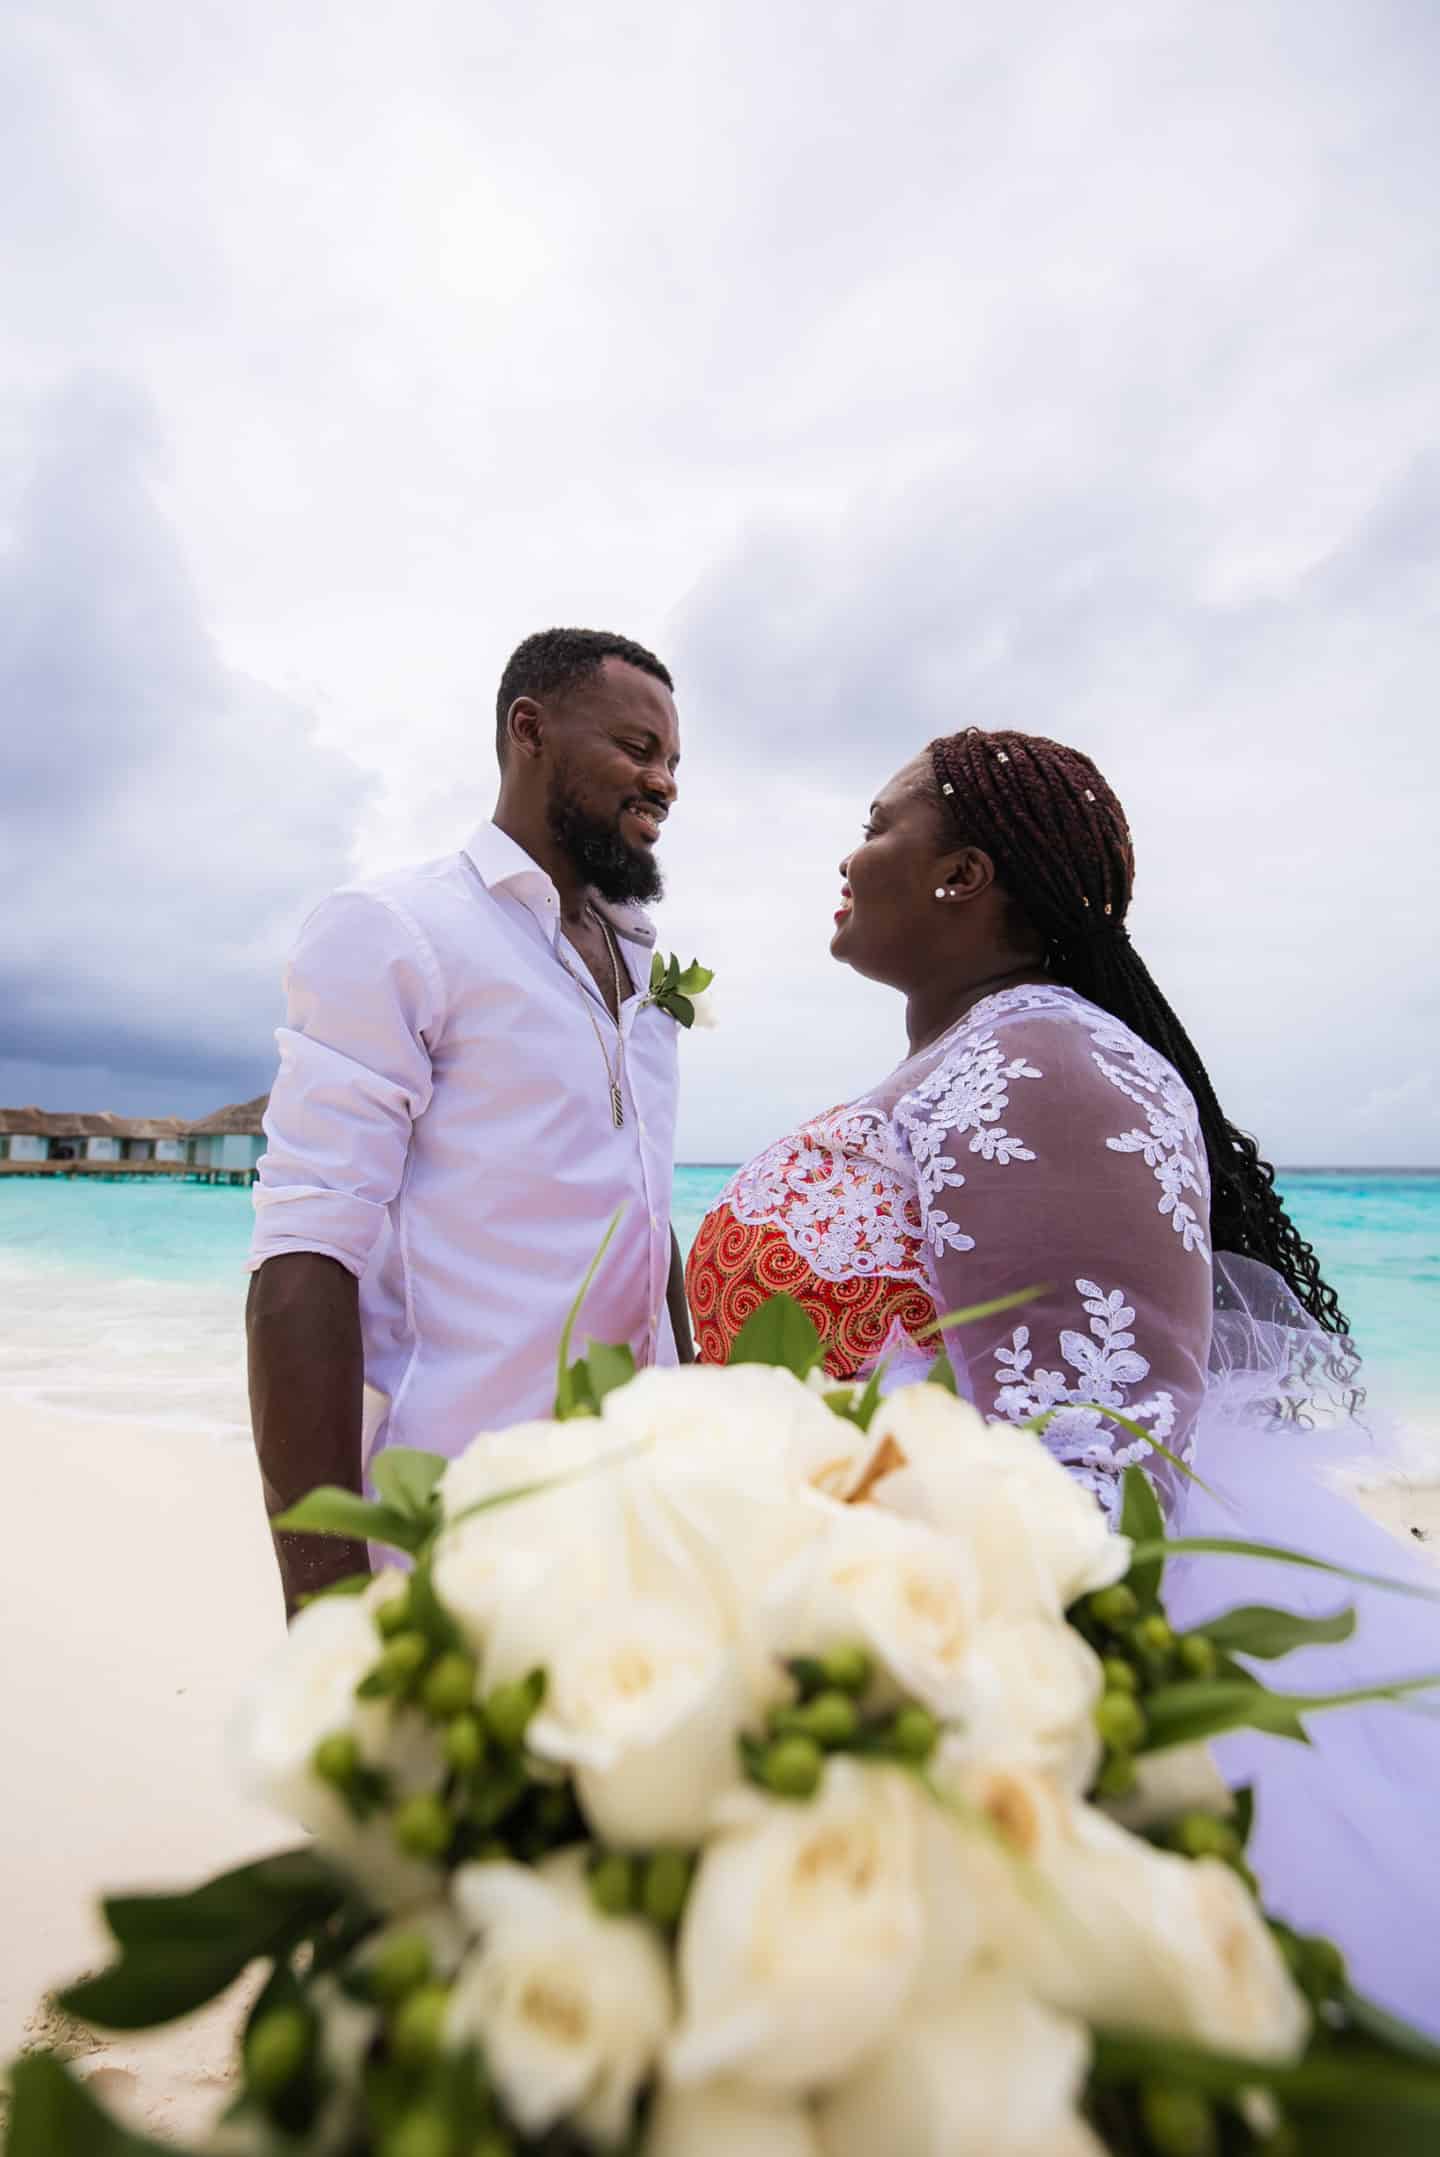 Renewal of vows experience in Maldives